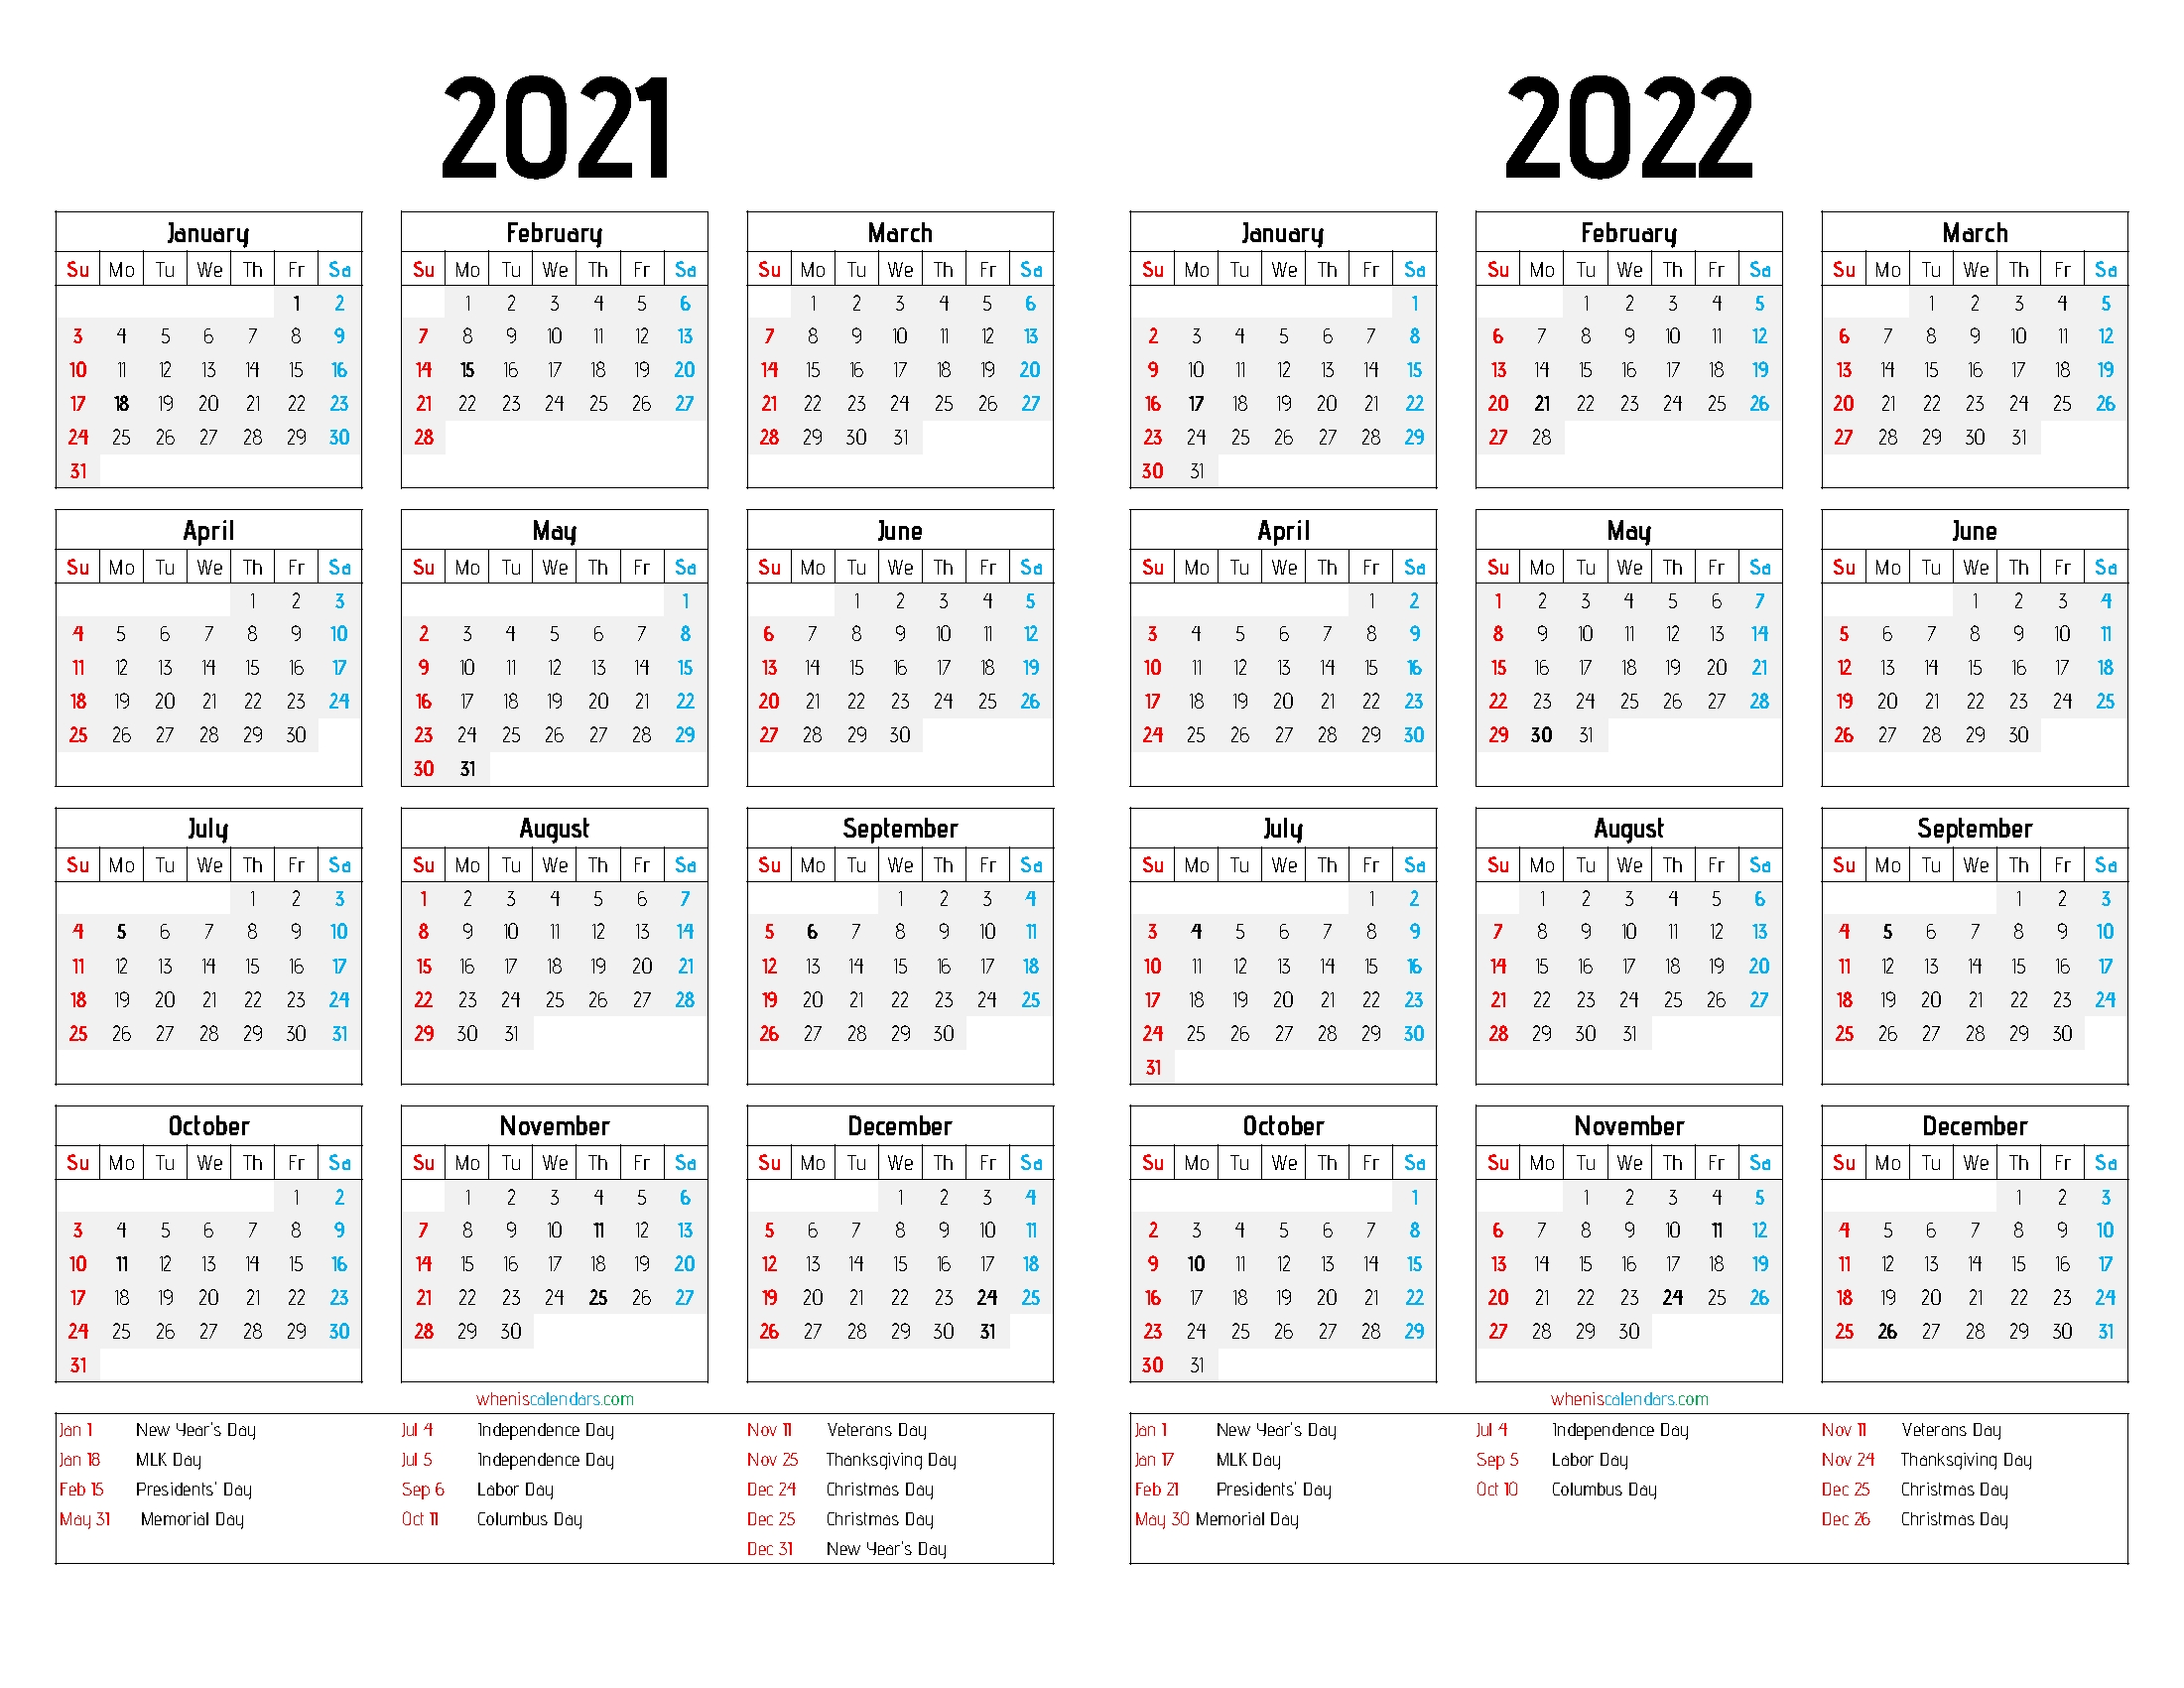 Printable 2021 And 2022 Calendar Two Year